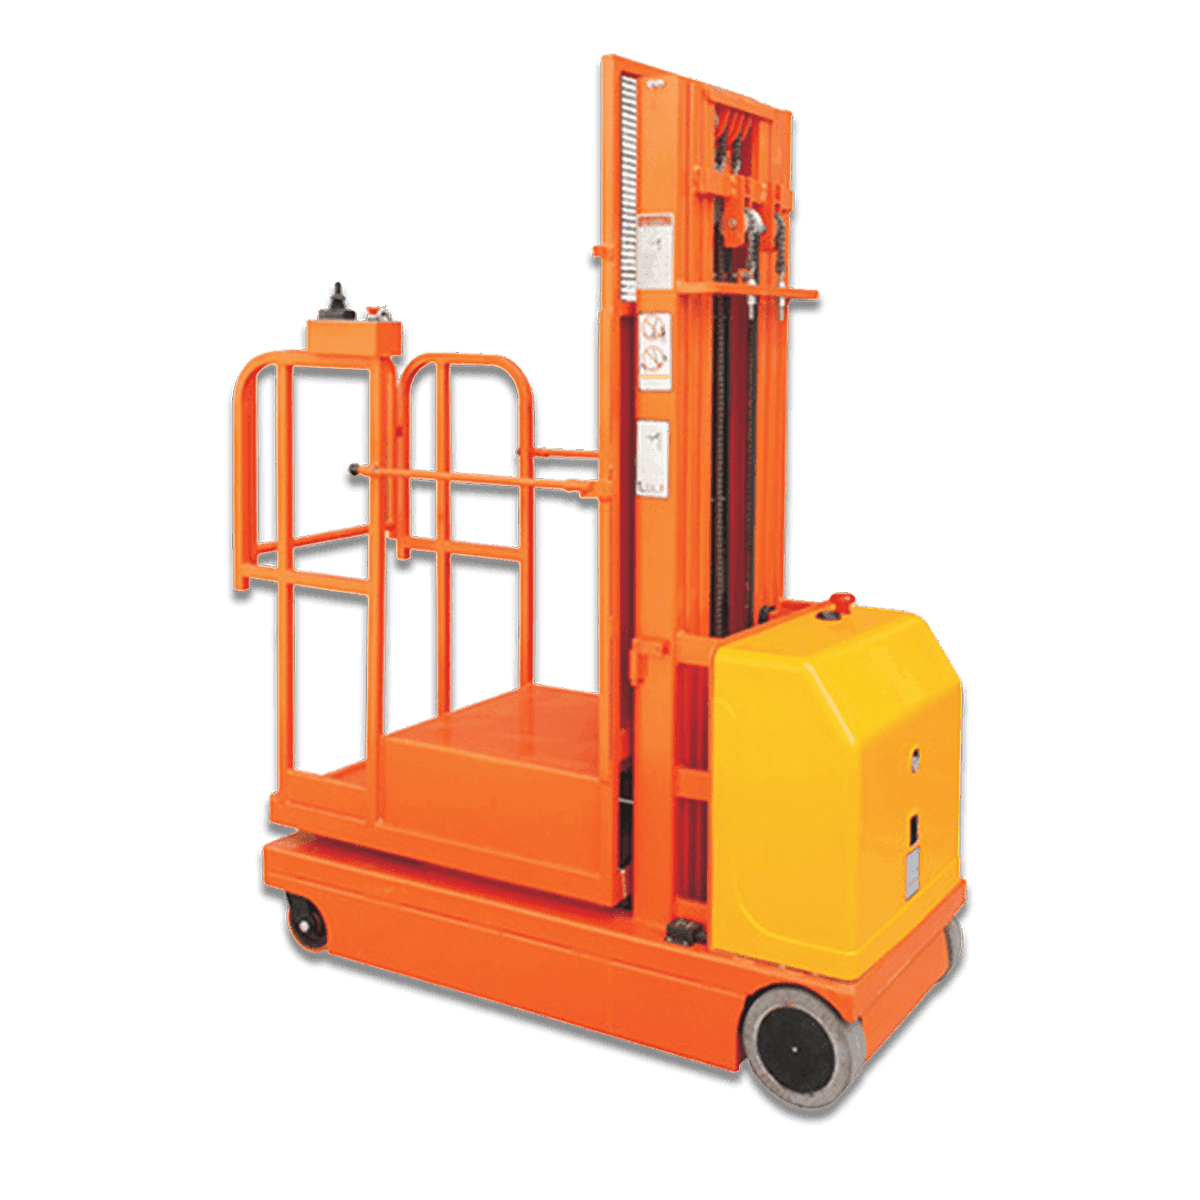 Whole-electricomotion aerical order picker